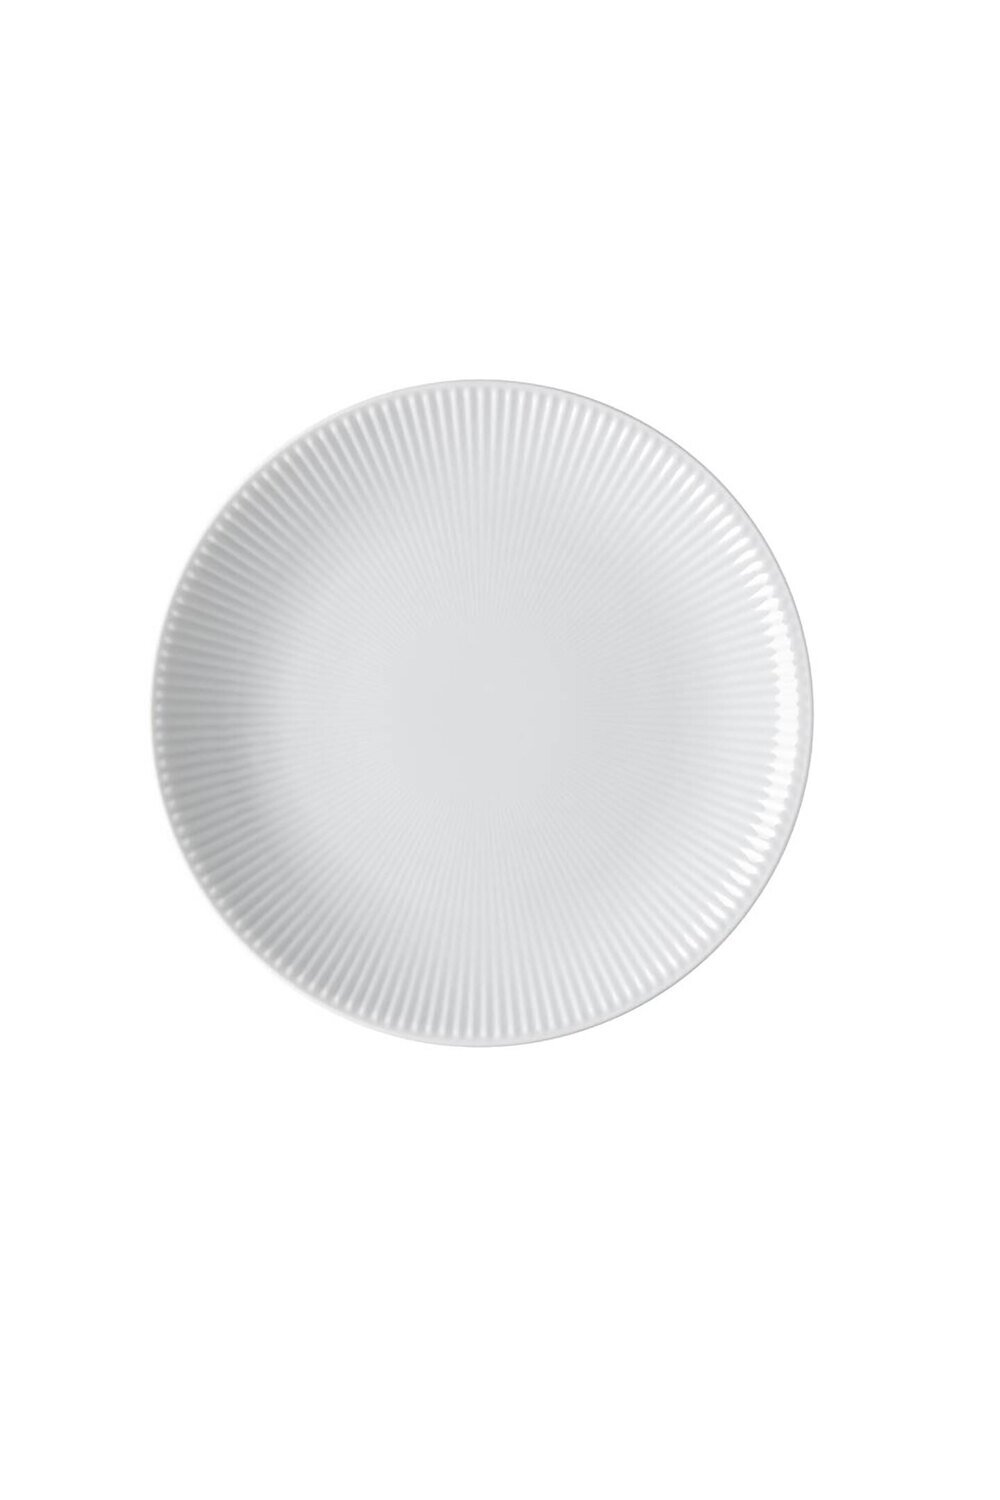 Rosenthal Blend Relief 1 Salad Plate 8 1/4 Inch